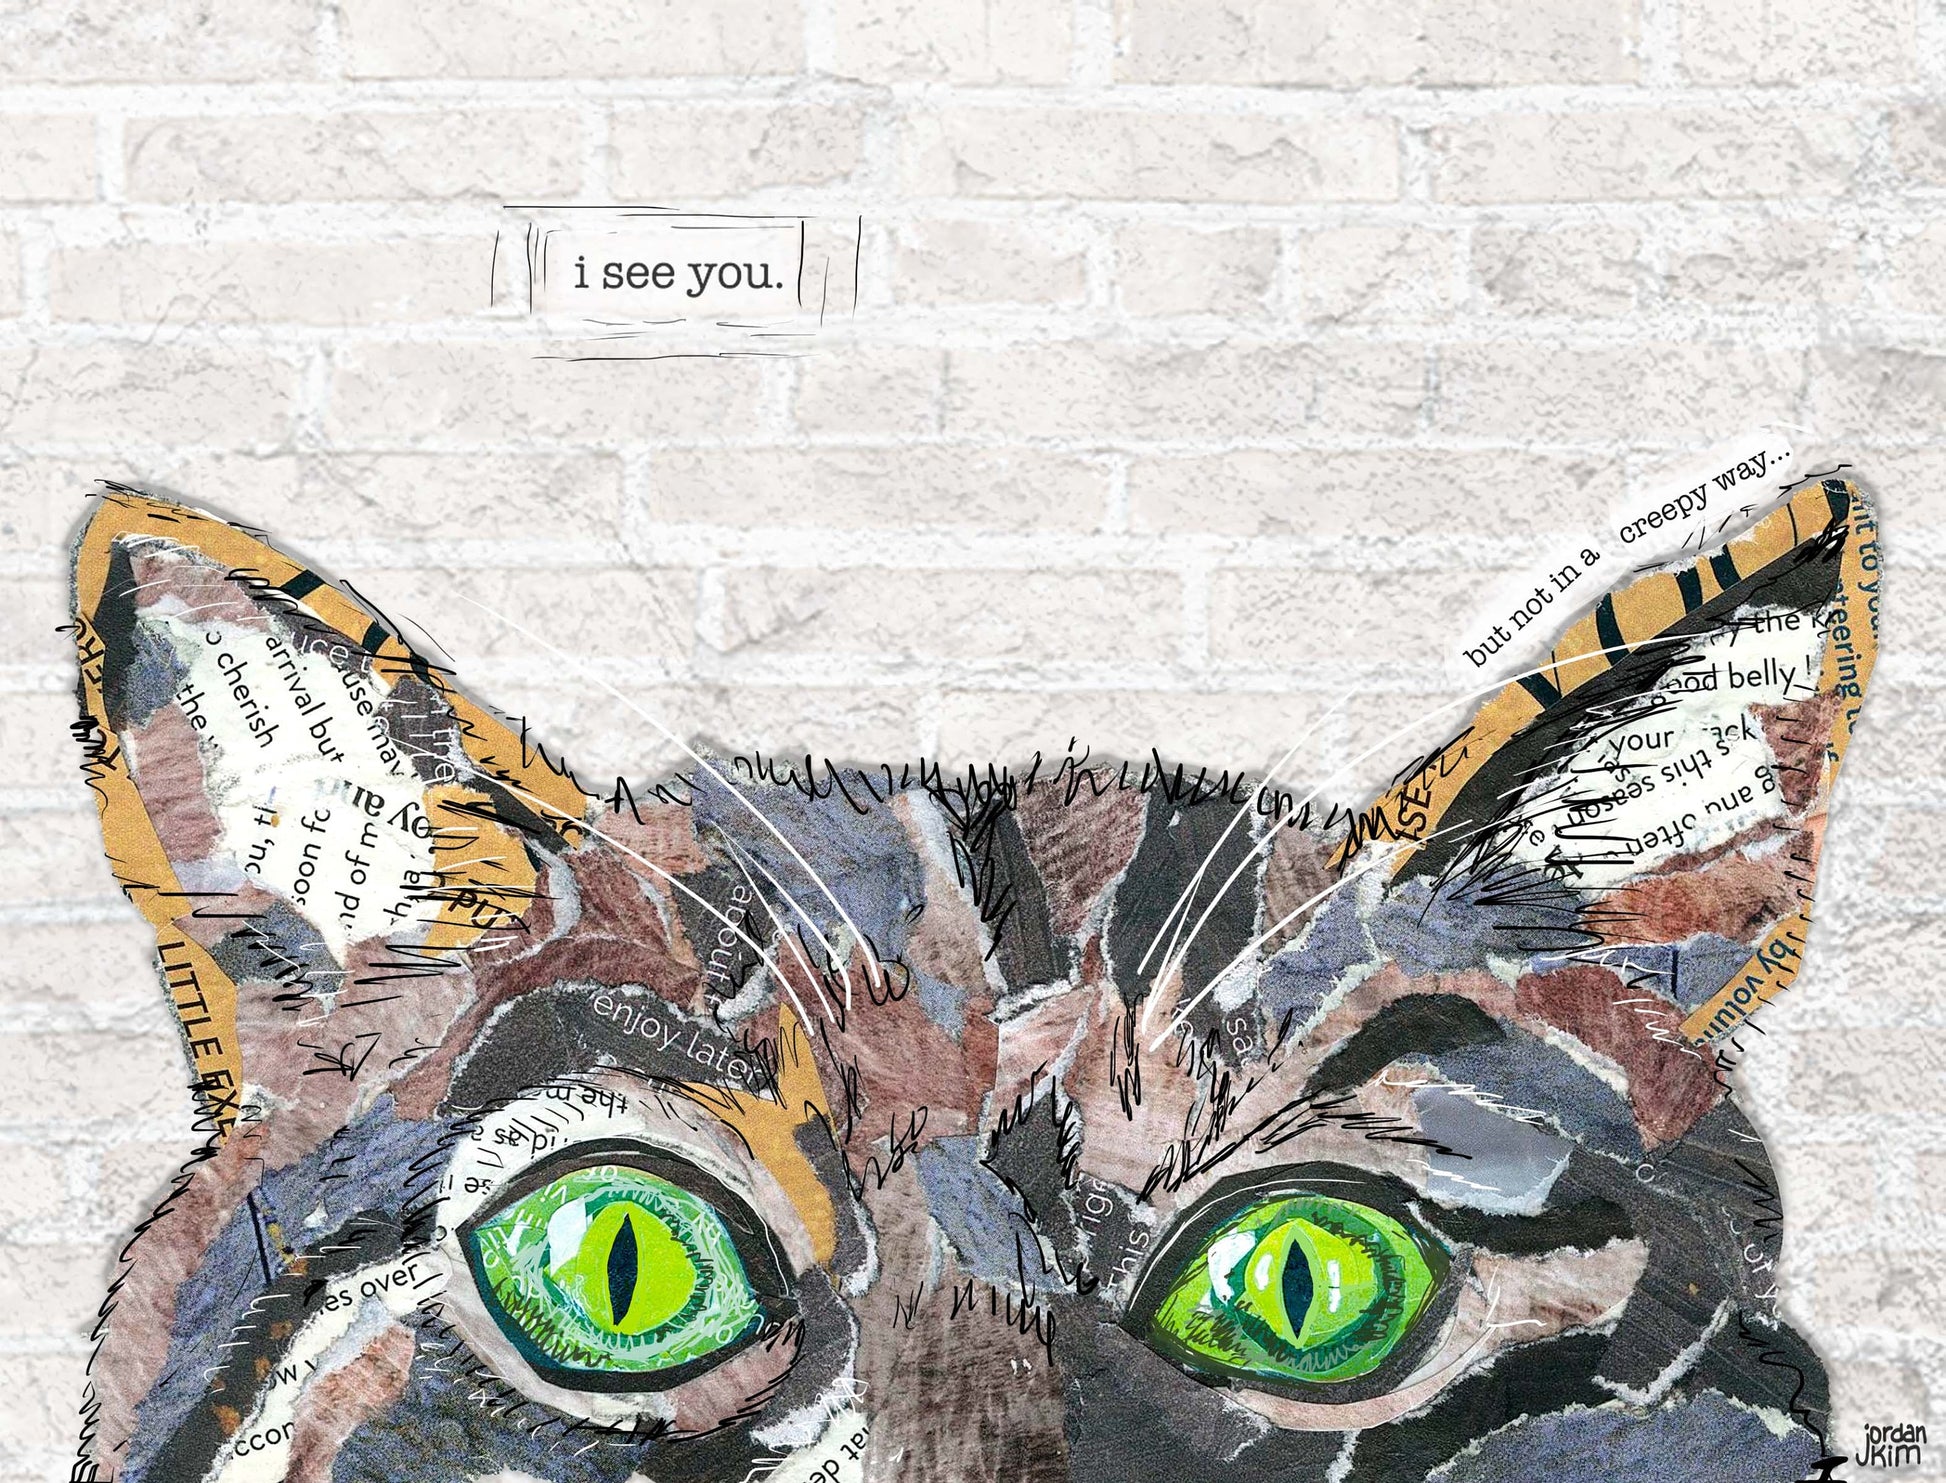 Greeting Card of mixed media collage of a Cat, pets, funny text outside, Blank Inside